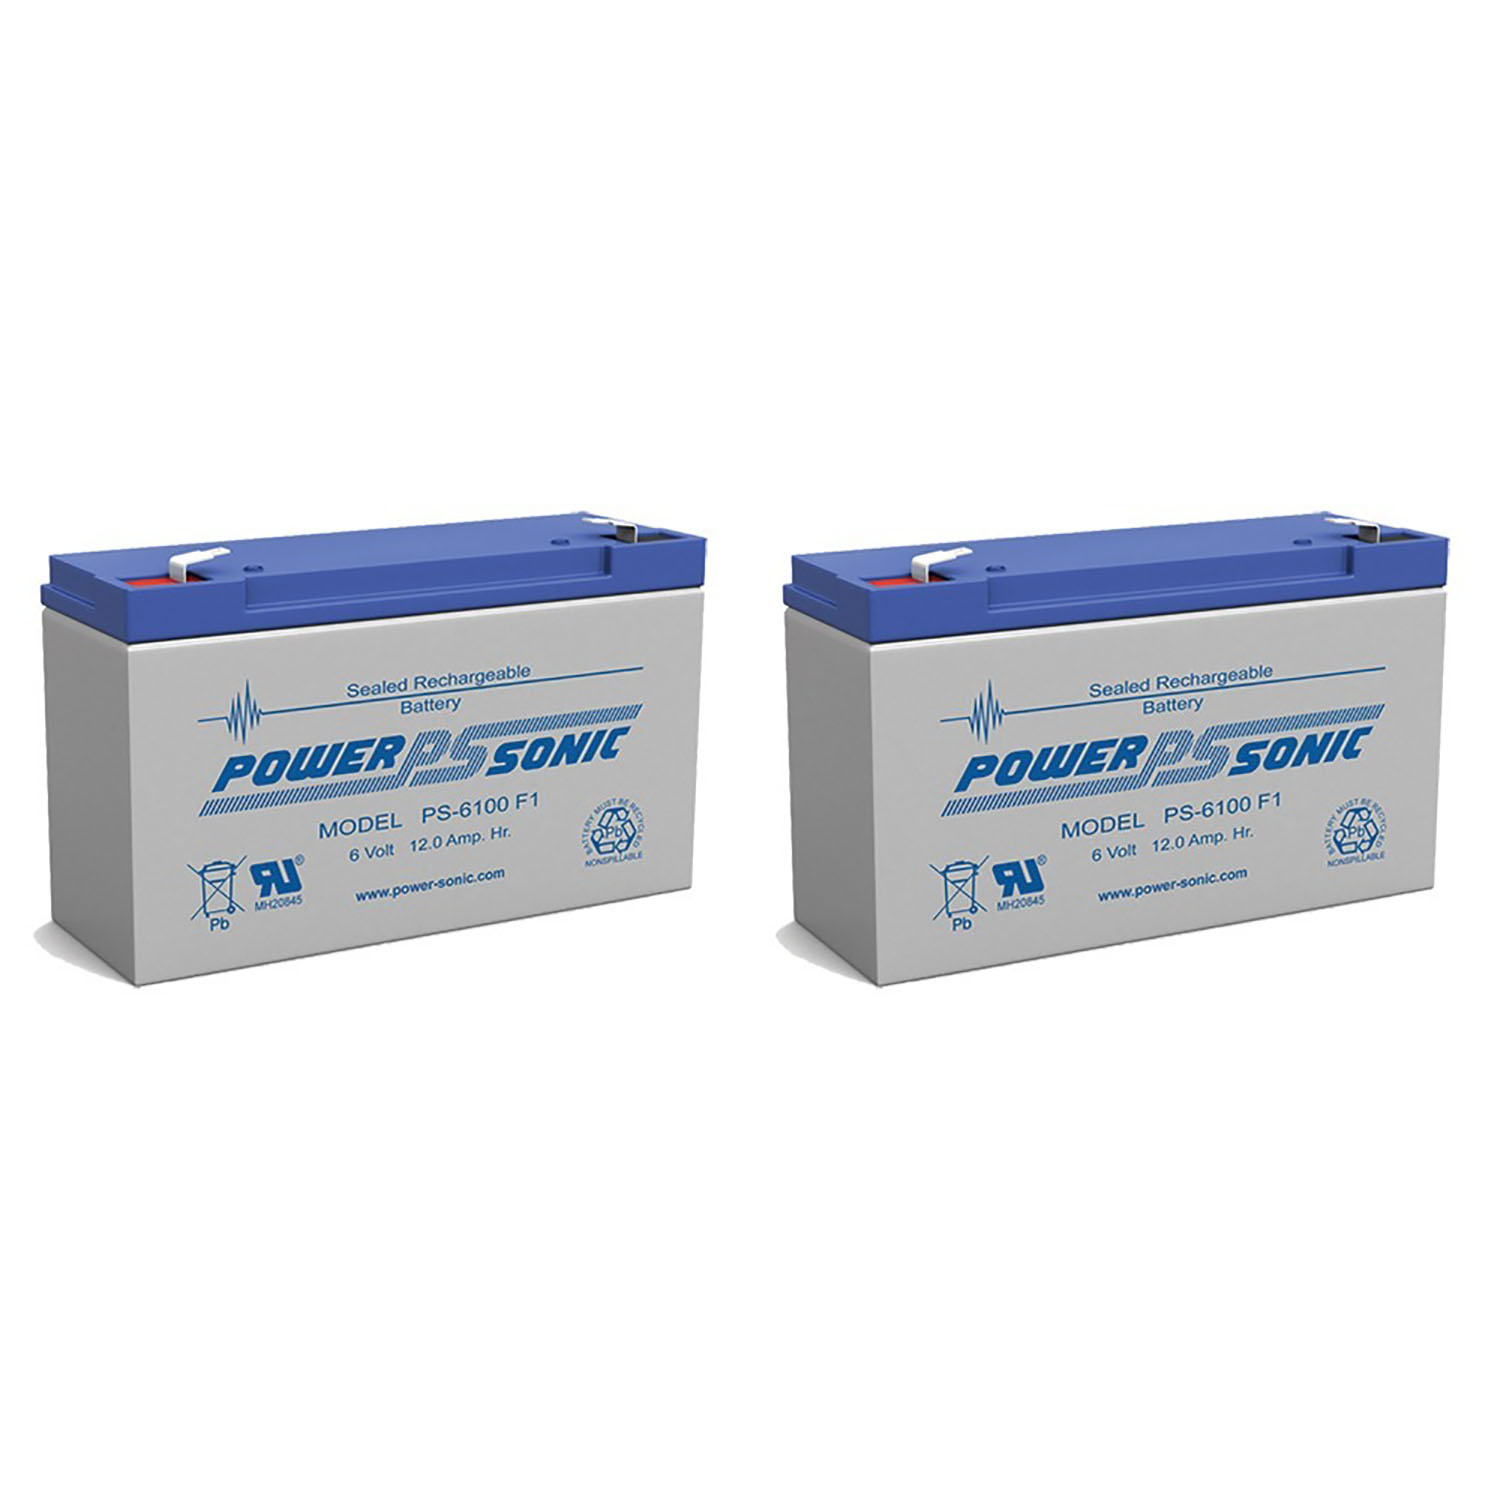 PS-6100 6V 12AH Data Shield ST550 Replacement Battery - 2 Pack